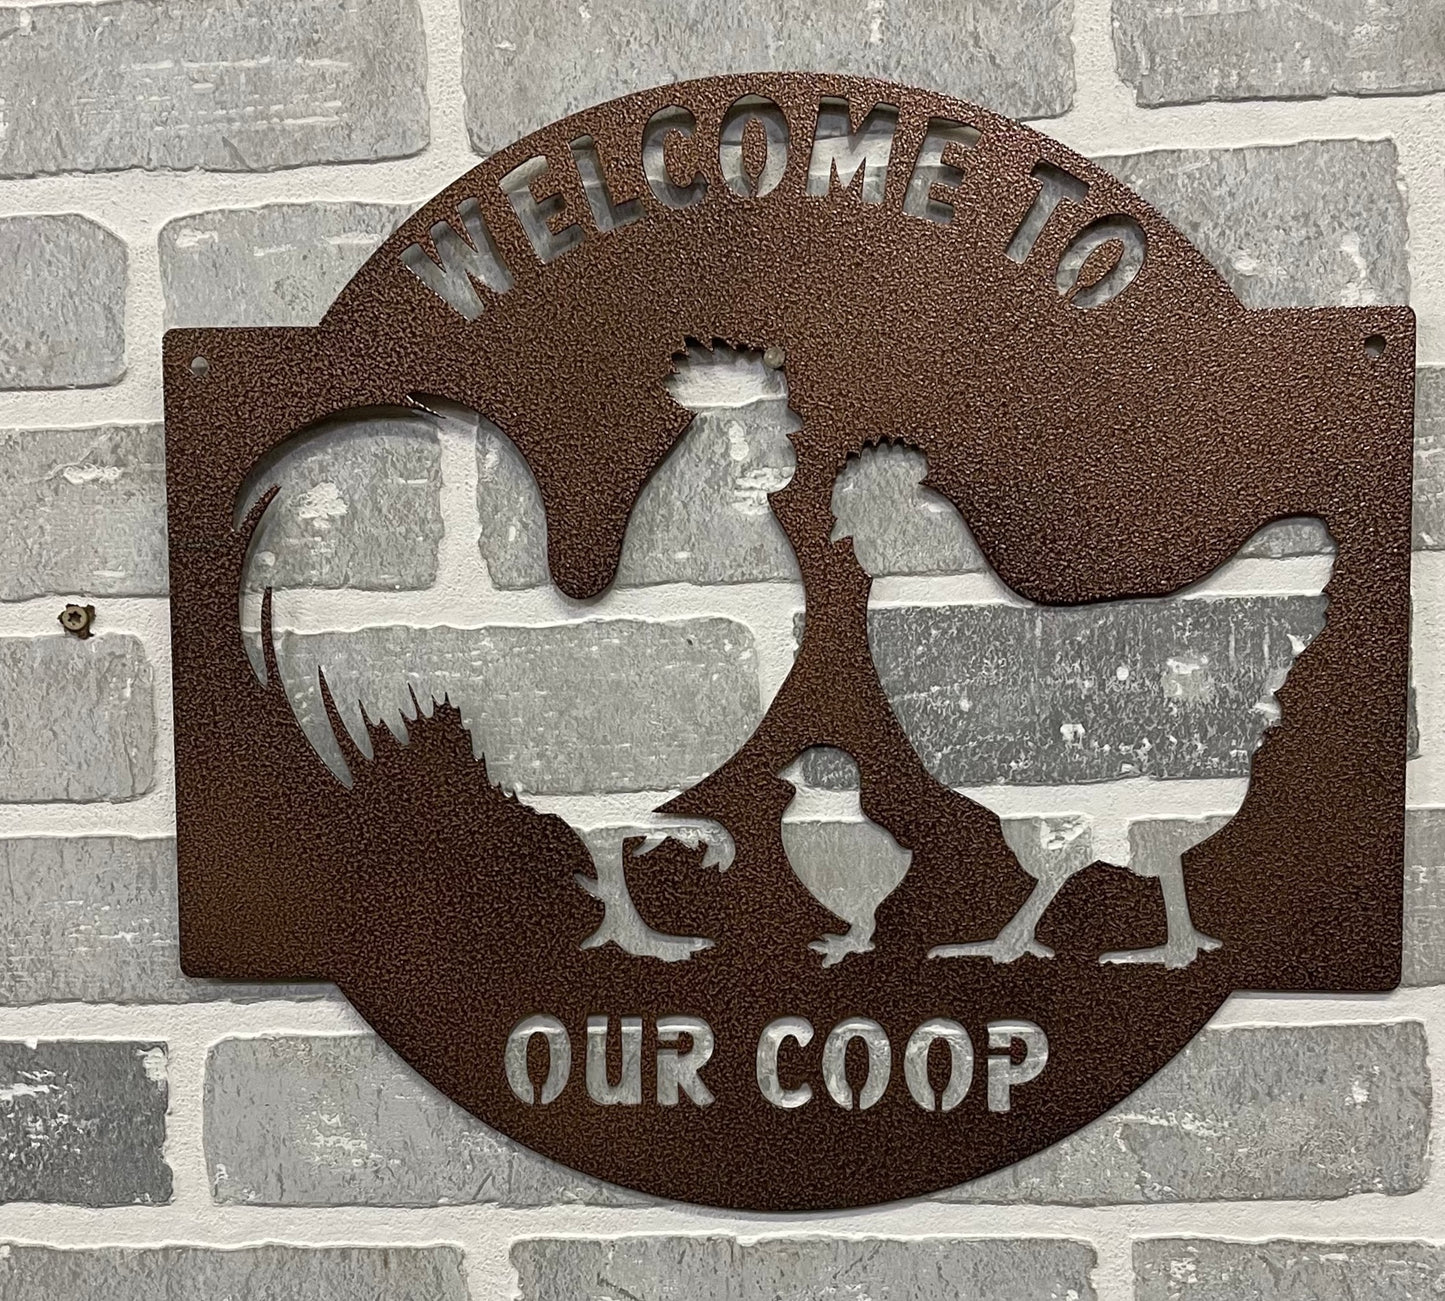 Welcome To Our Coop